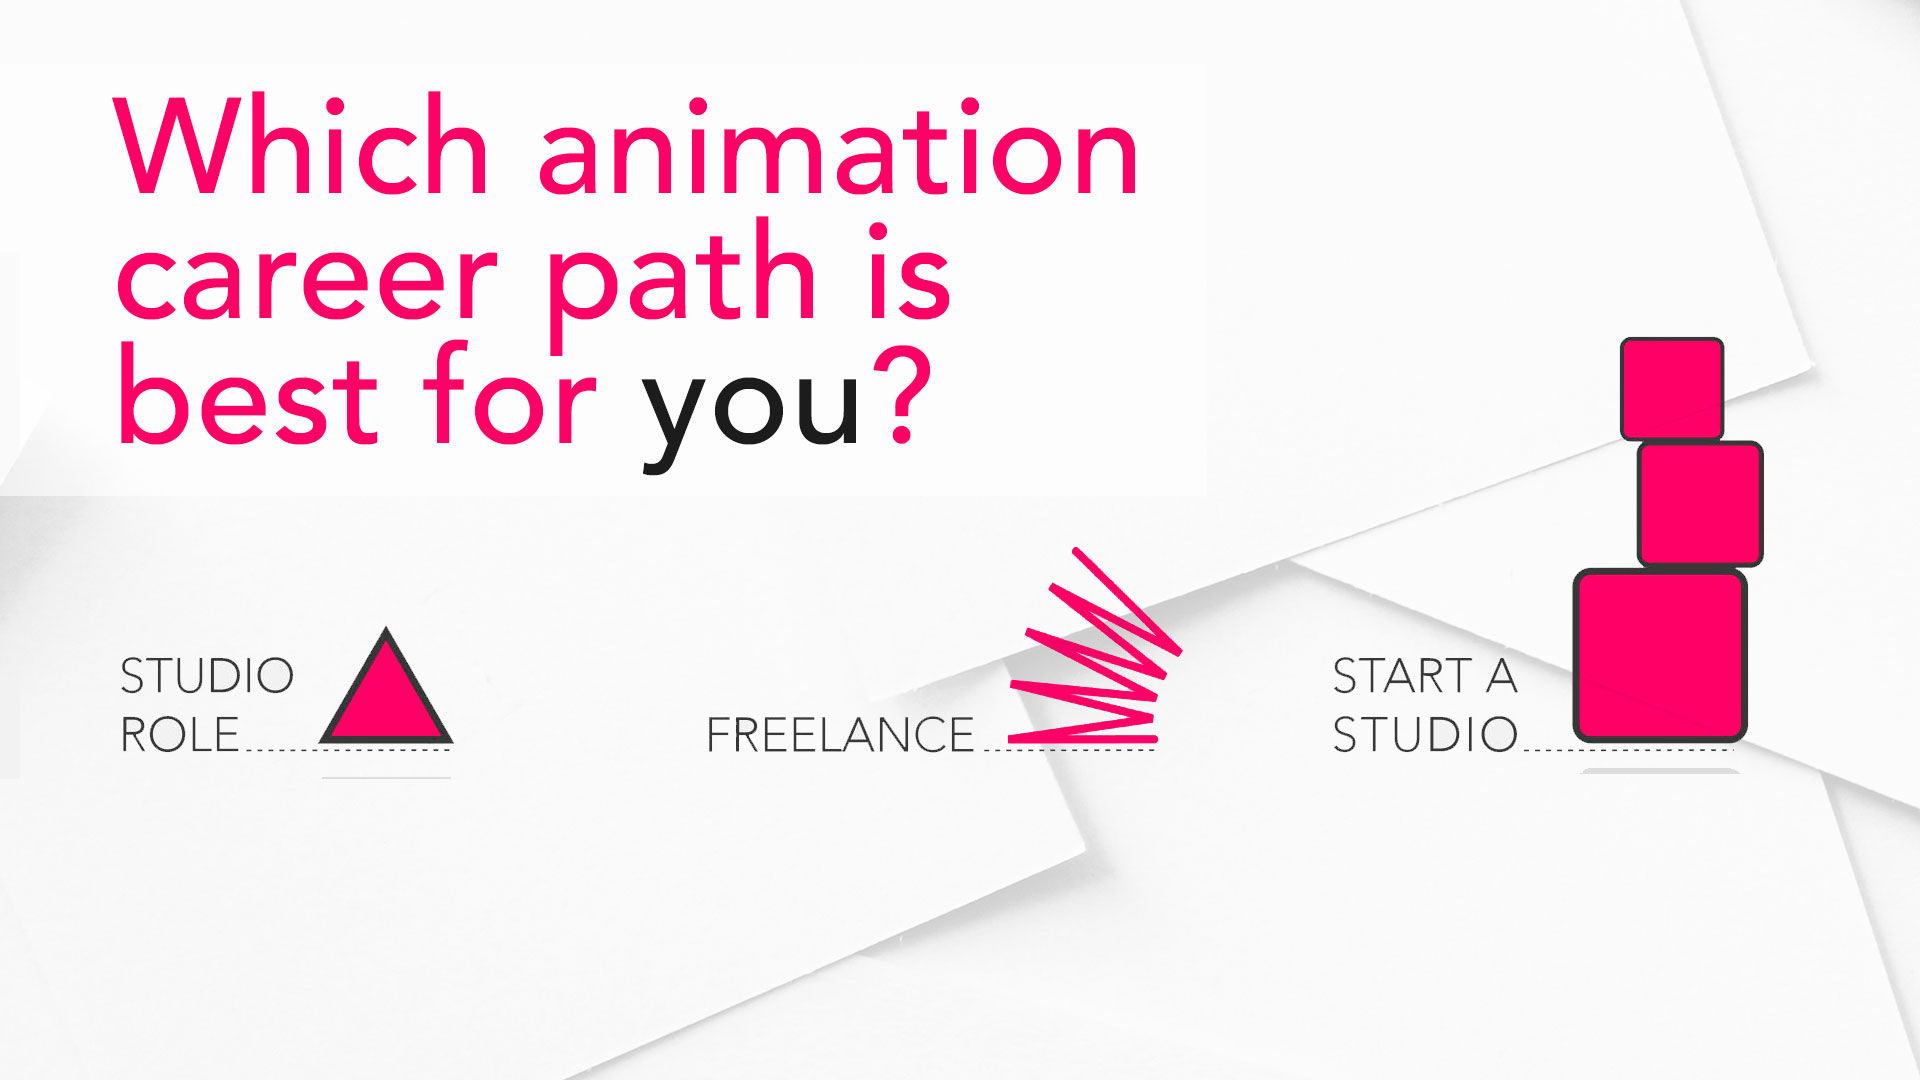 Studio or Freelance. Which animation career path is right for you?